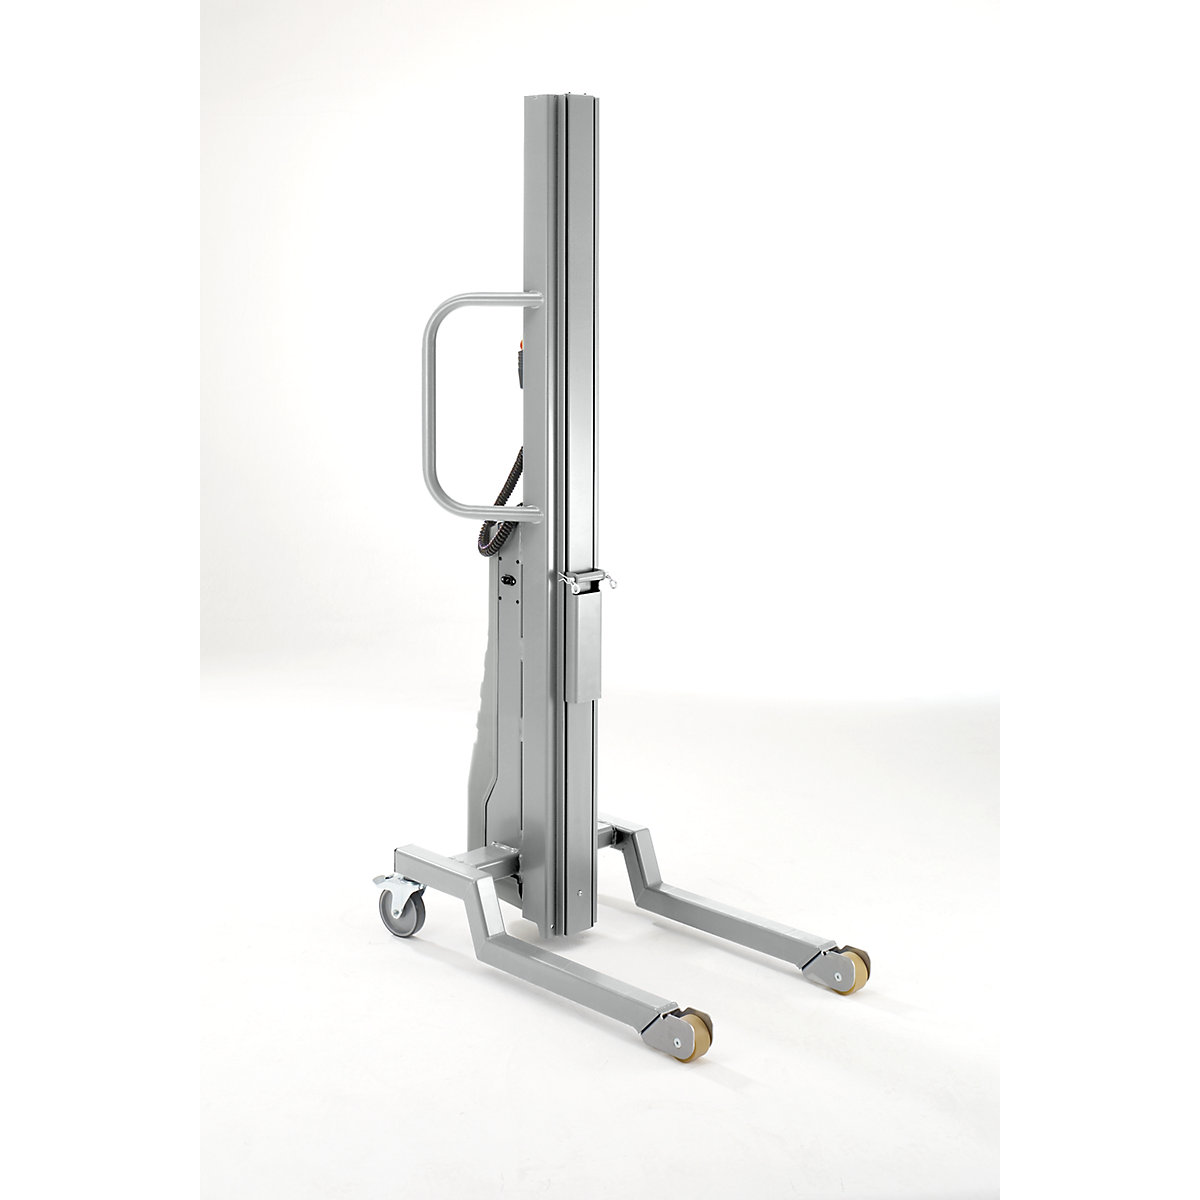 Multi-lifter, in stainless steel, max. load 150 kg, with 2 fork rollers